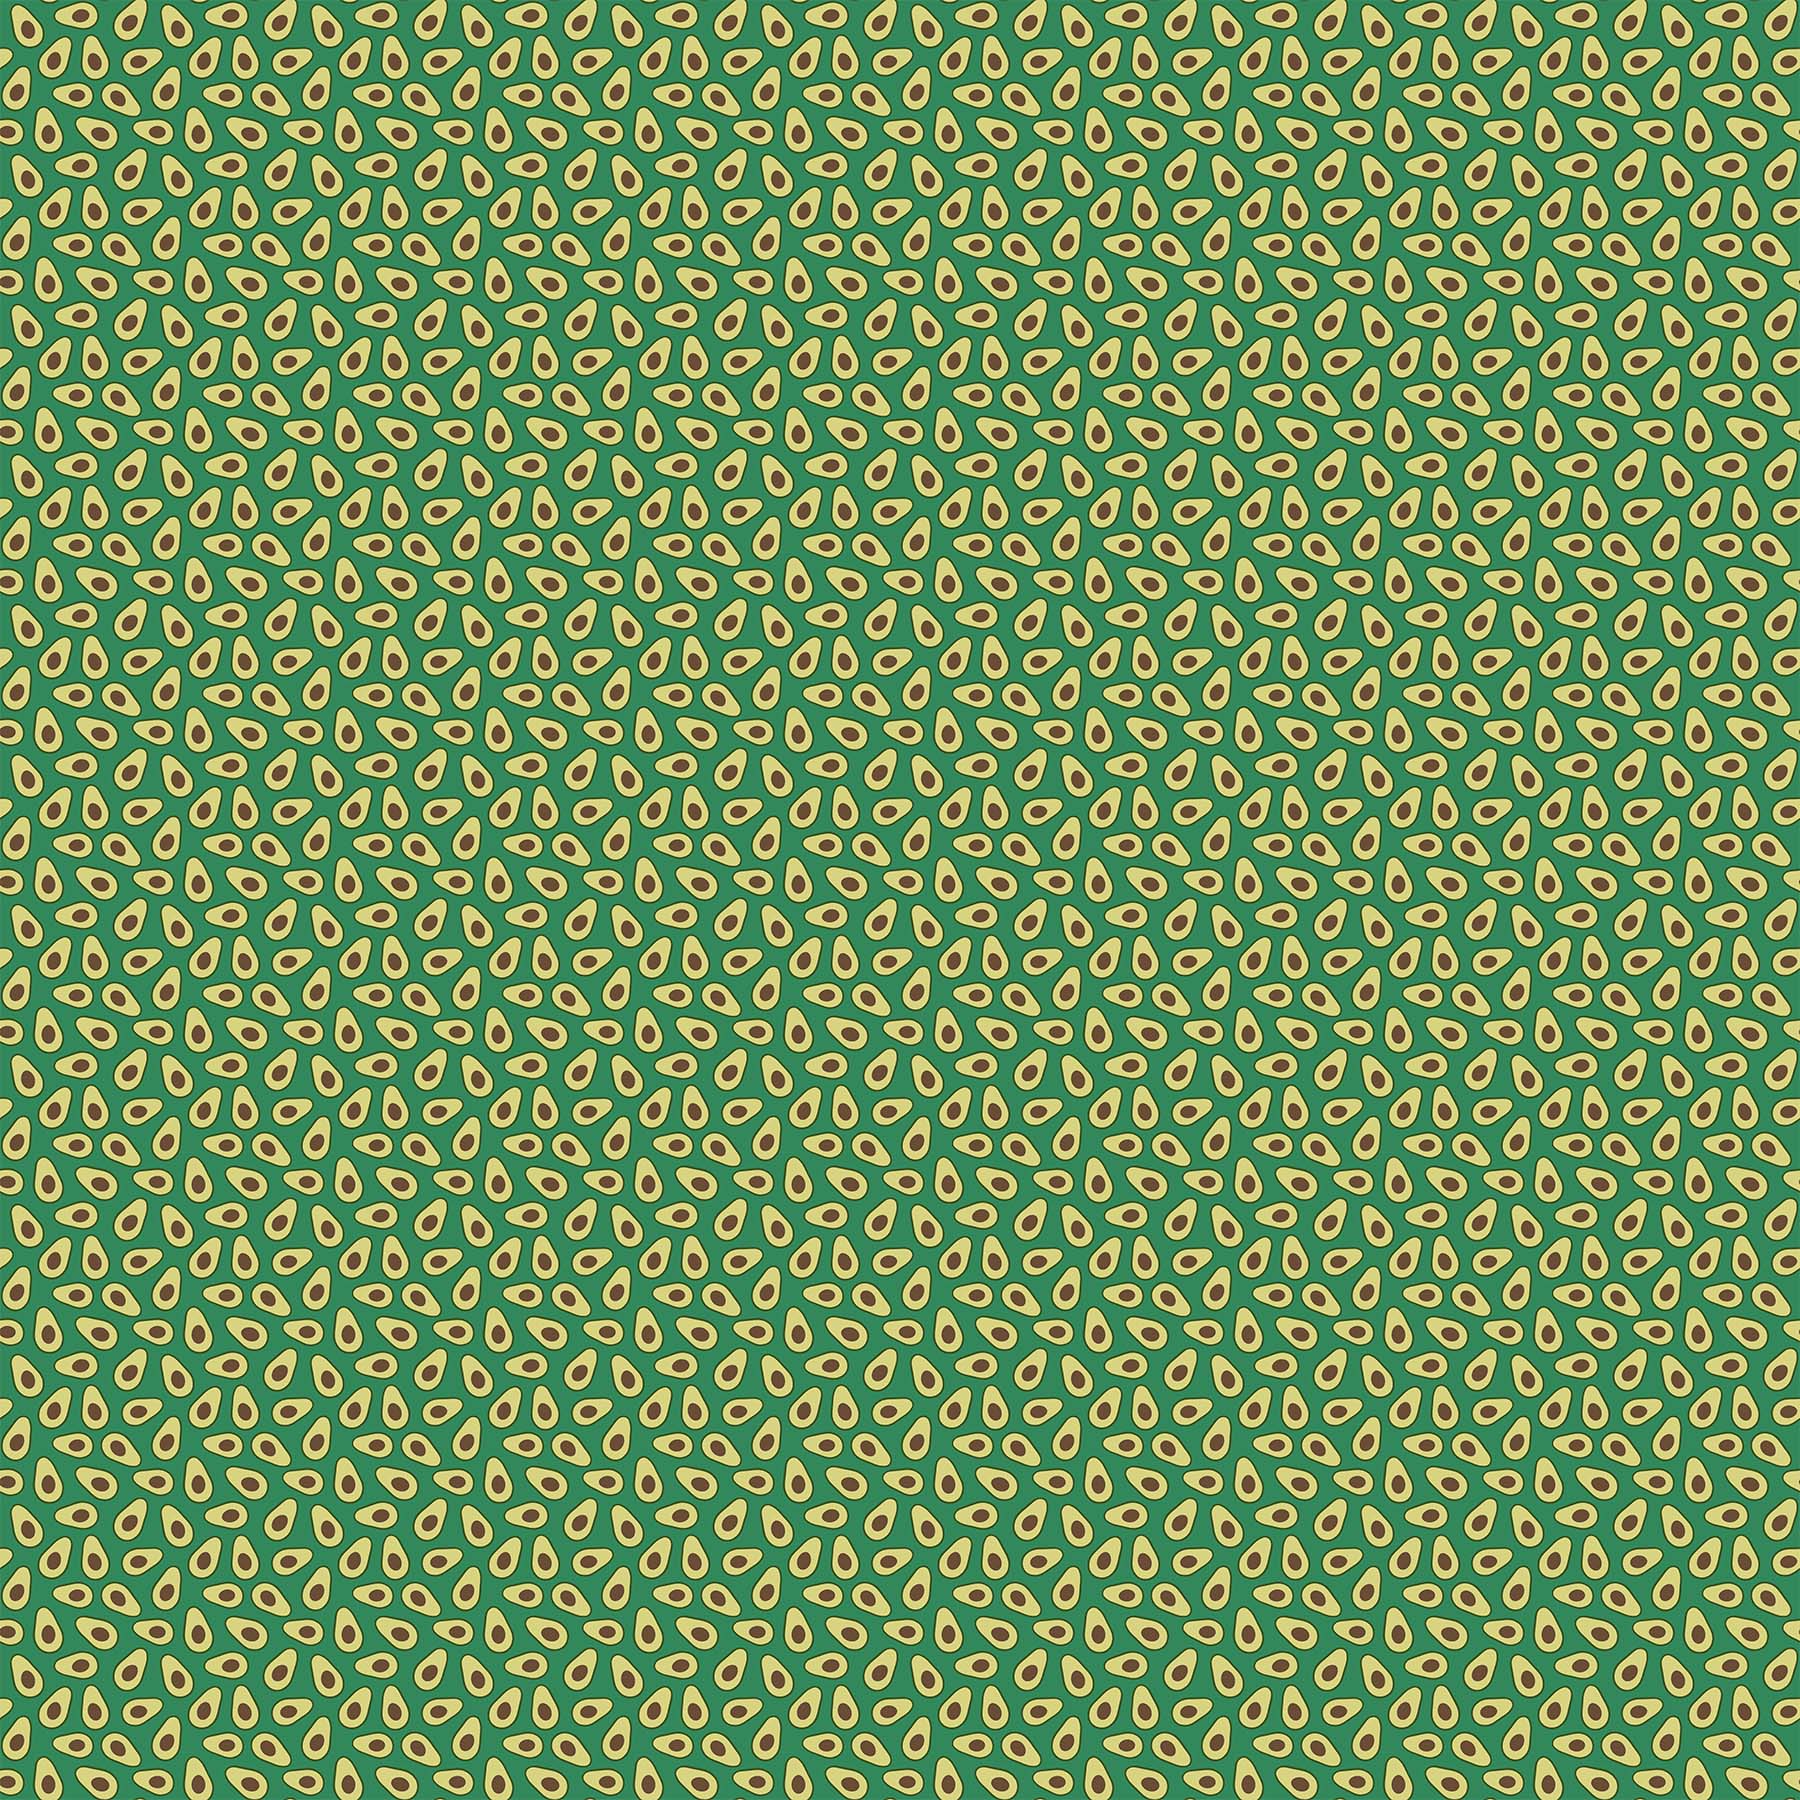 Avocado Love Quilt Fabric - Mini Avocados in Teal Green - 24583-68